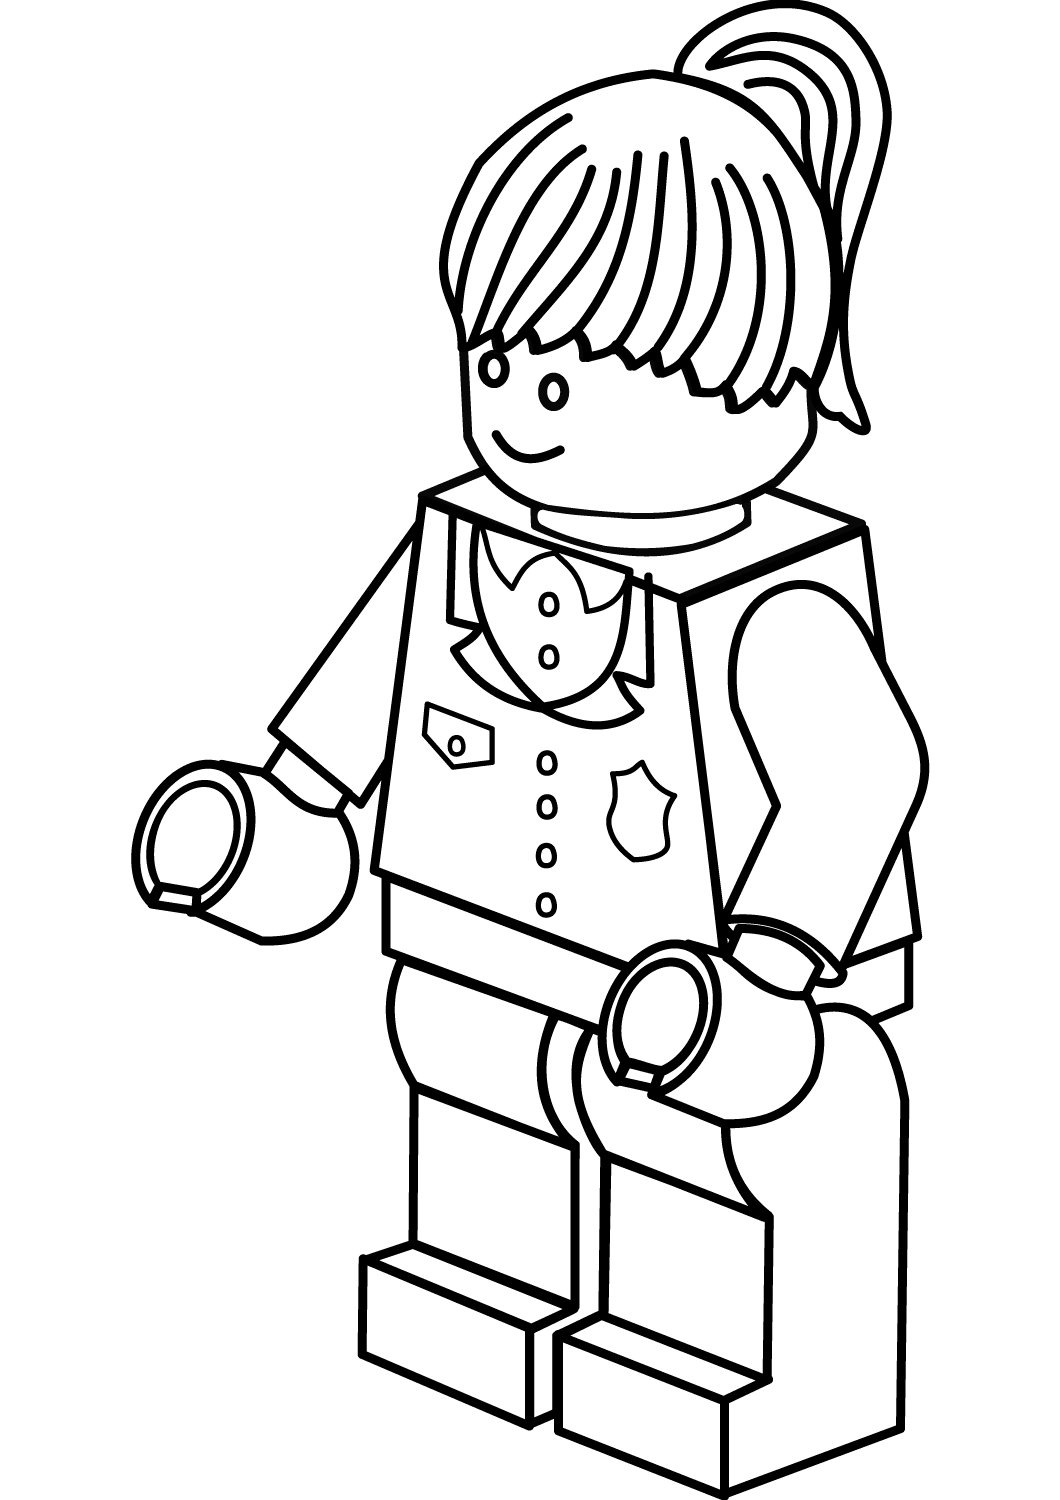 Lego Police Woman Coloring Page